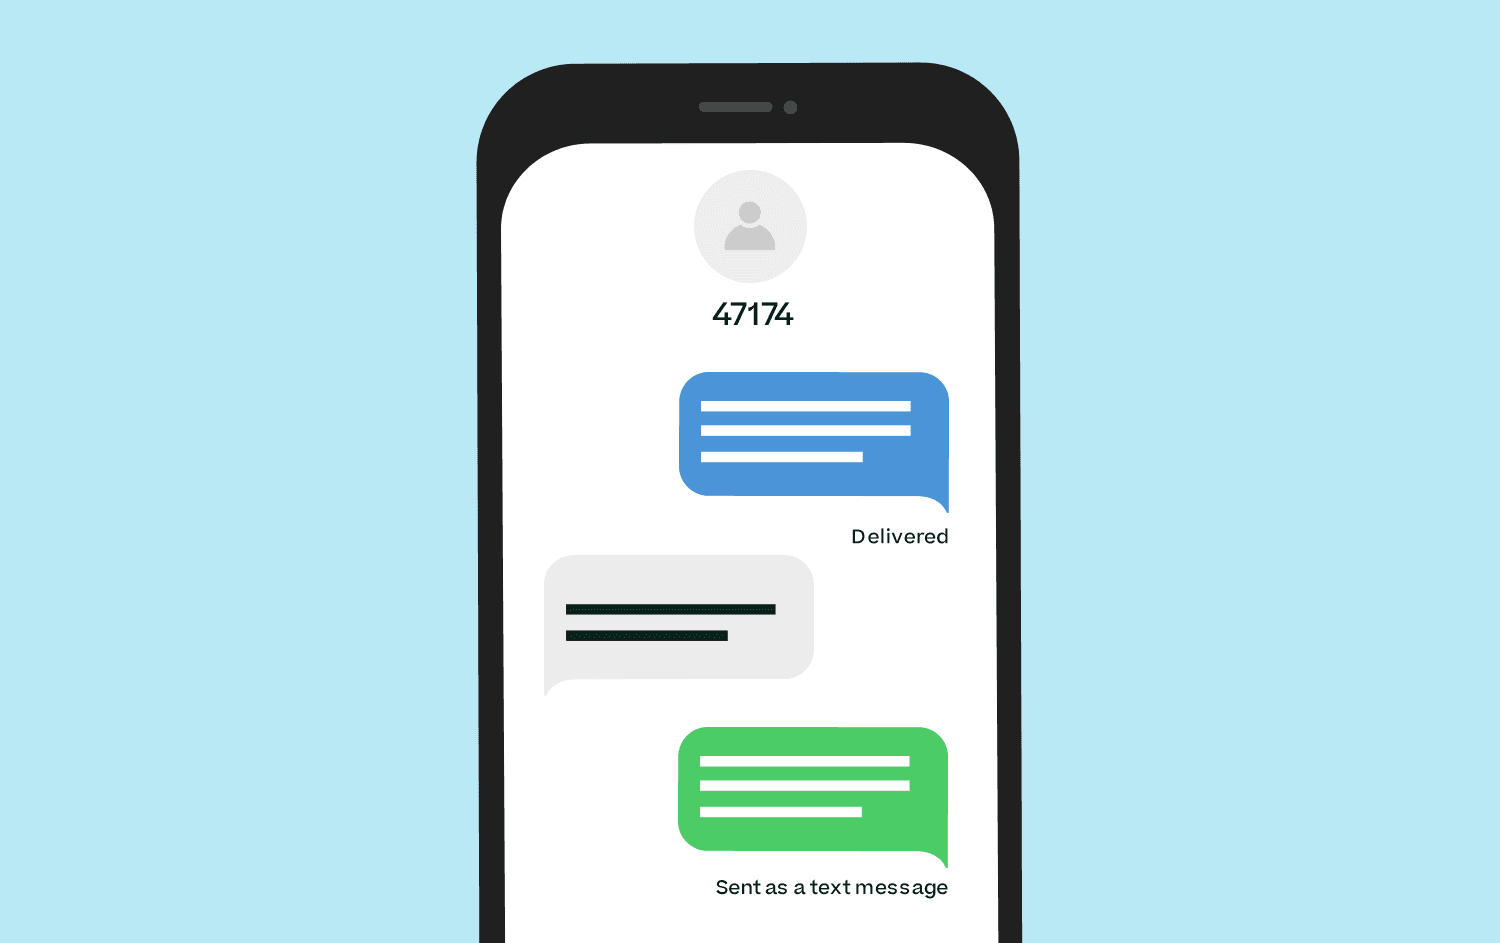 Cartoon text message conversation showing blue bubbles and then a green one from the sender that shows “Sent as text message”